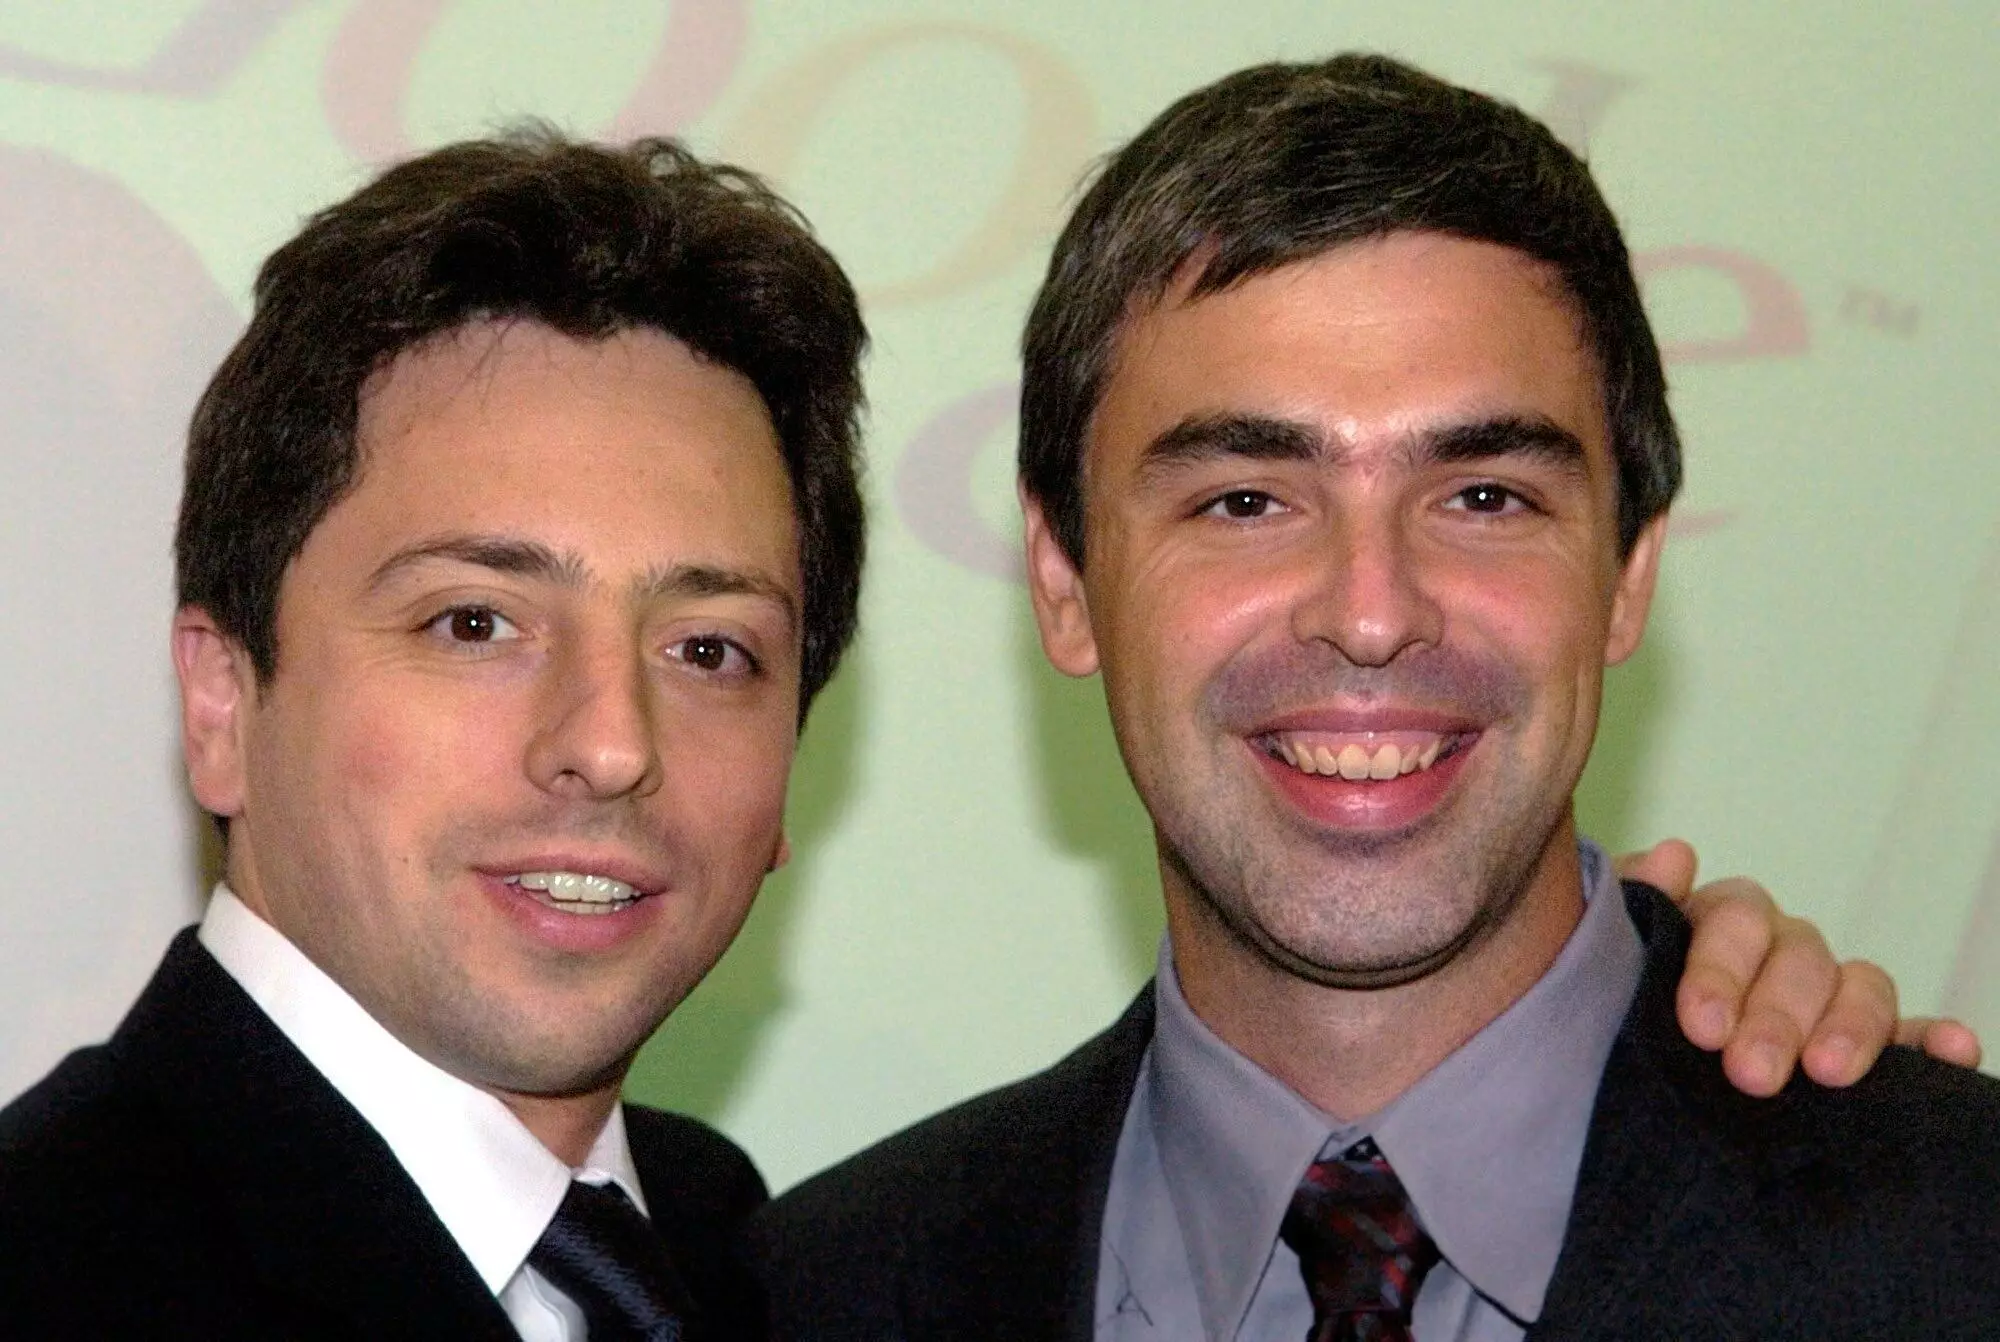 Larry Page and Sergey Brin, founders of the internet search engine 'Google'.